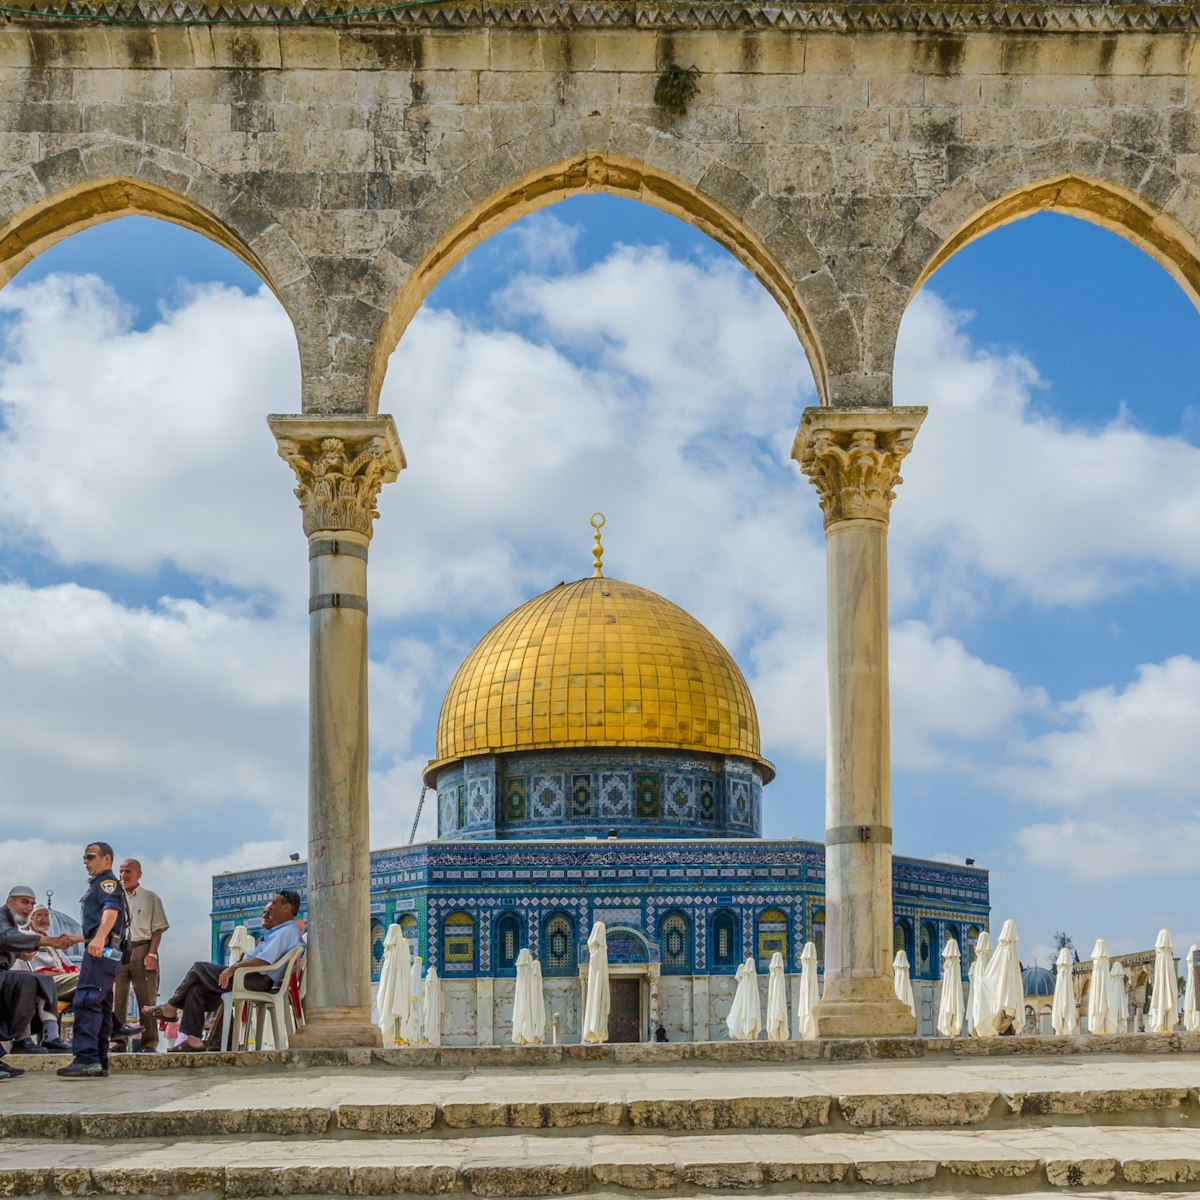 JERUSALEM, ISRAEL JUNE 10 2015: Israeli Temple Mount policeman greets the locals under the arches near the Dome of the Rock on the Temple Mount on June 10 2015 in the Old City of Jerusalem Israel.; Shutterstock ID 408810679; Your name (First / Last): Lauren Keith; GL account no.: 65050; Netsuite department name: Online Editorial; Full Product or Project name including edition: Middle East Online Highlights Update